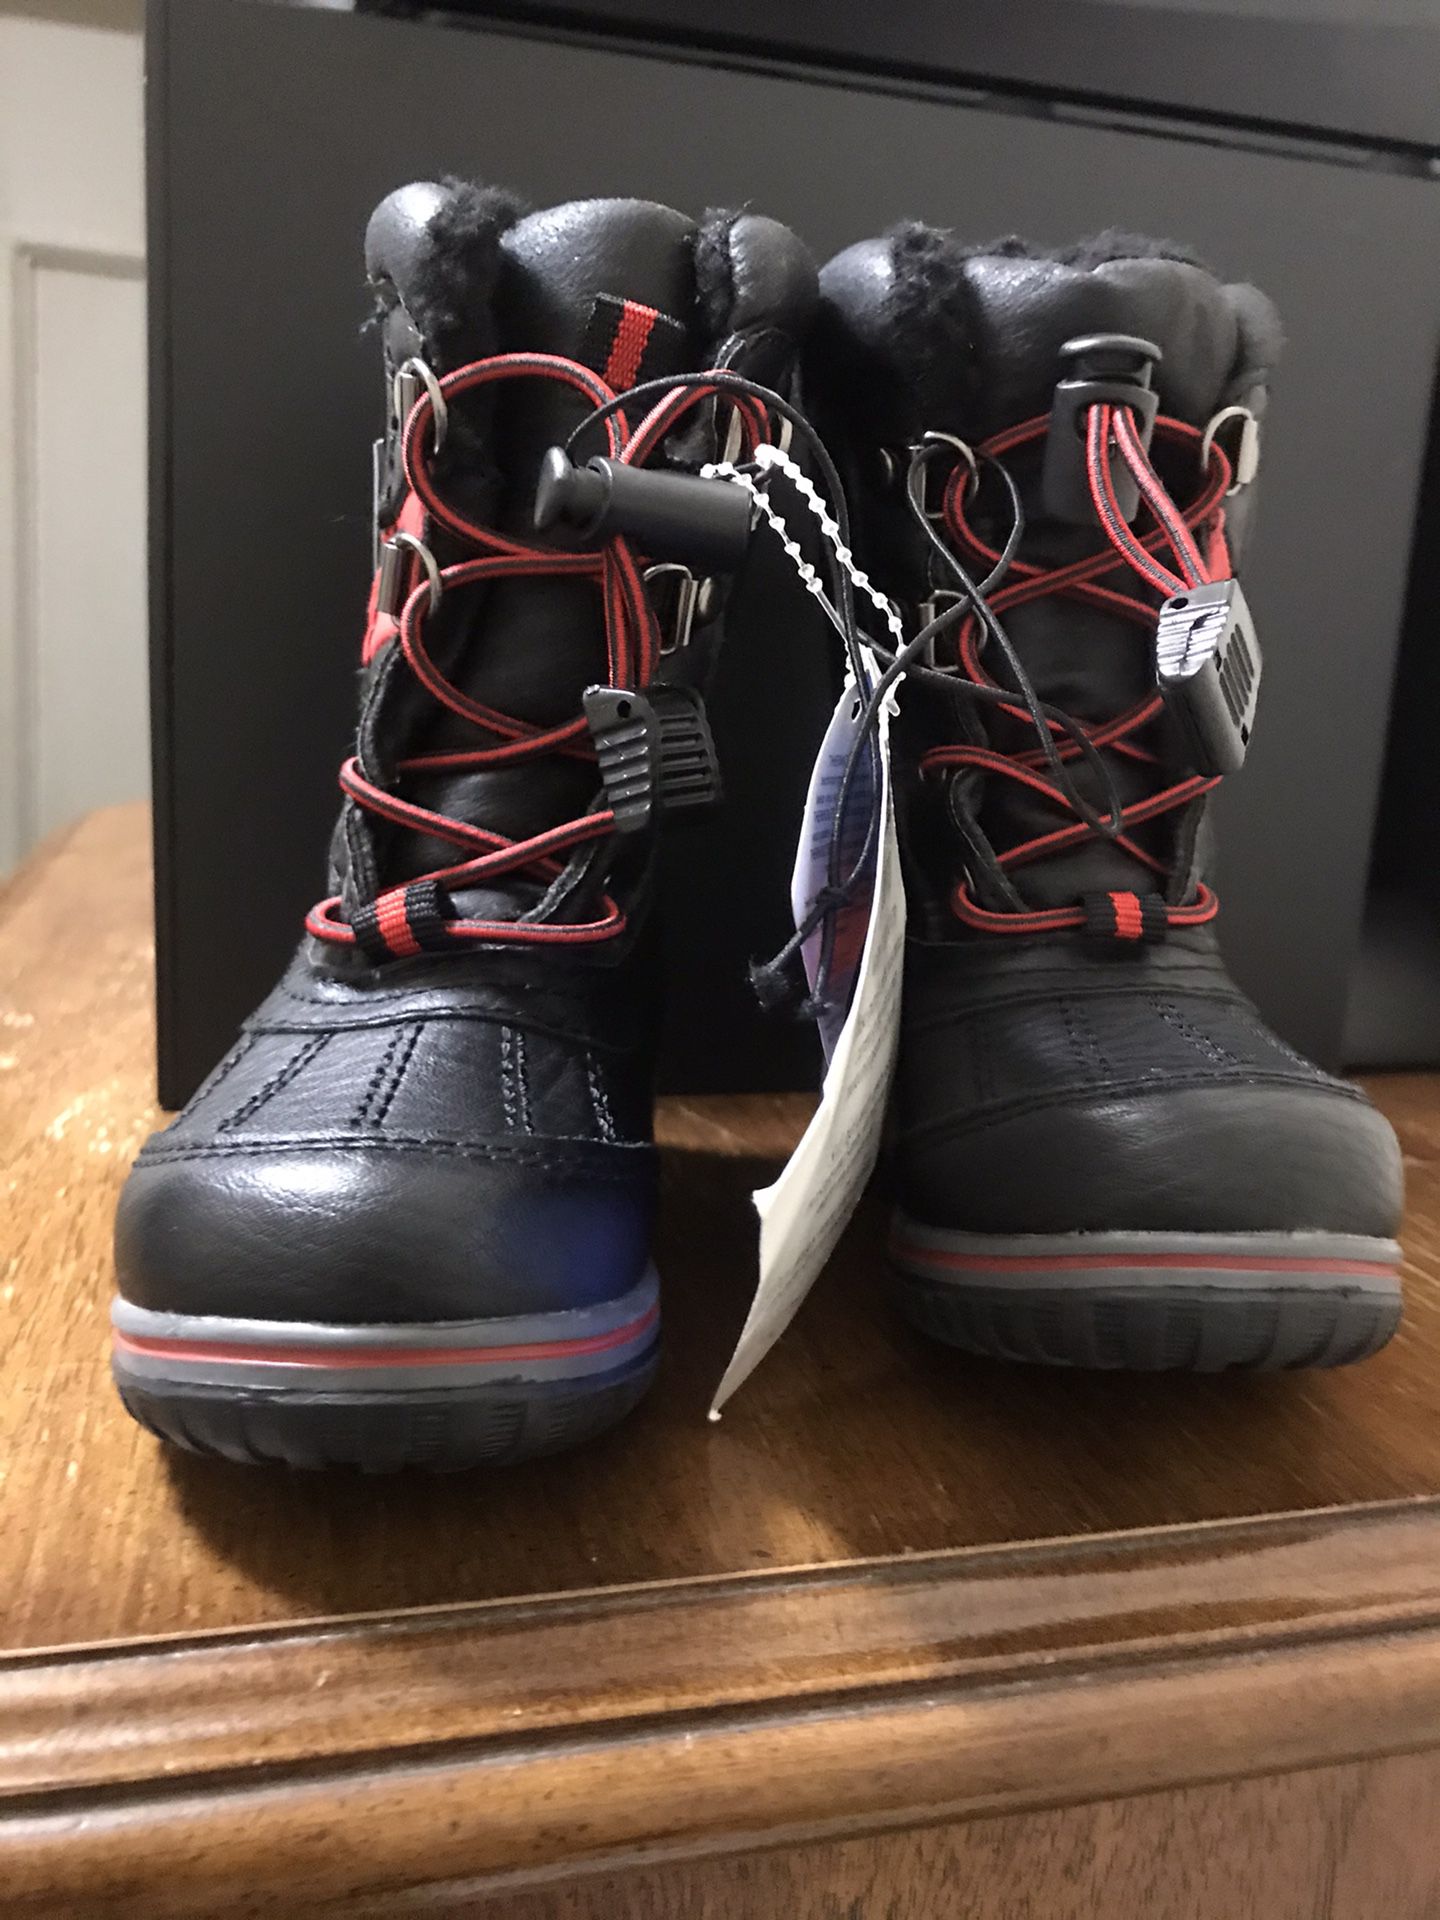 BRAND NEW snow Boots For Kids! Size 6 for Kids